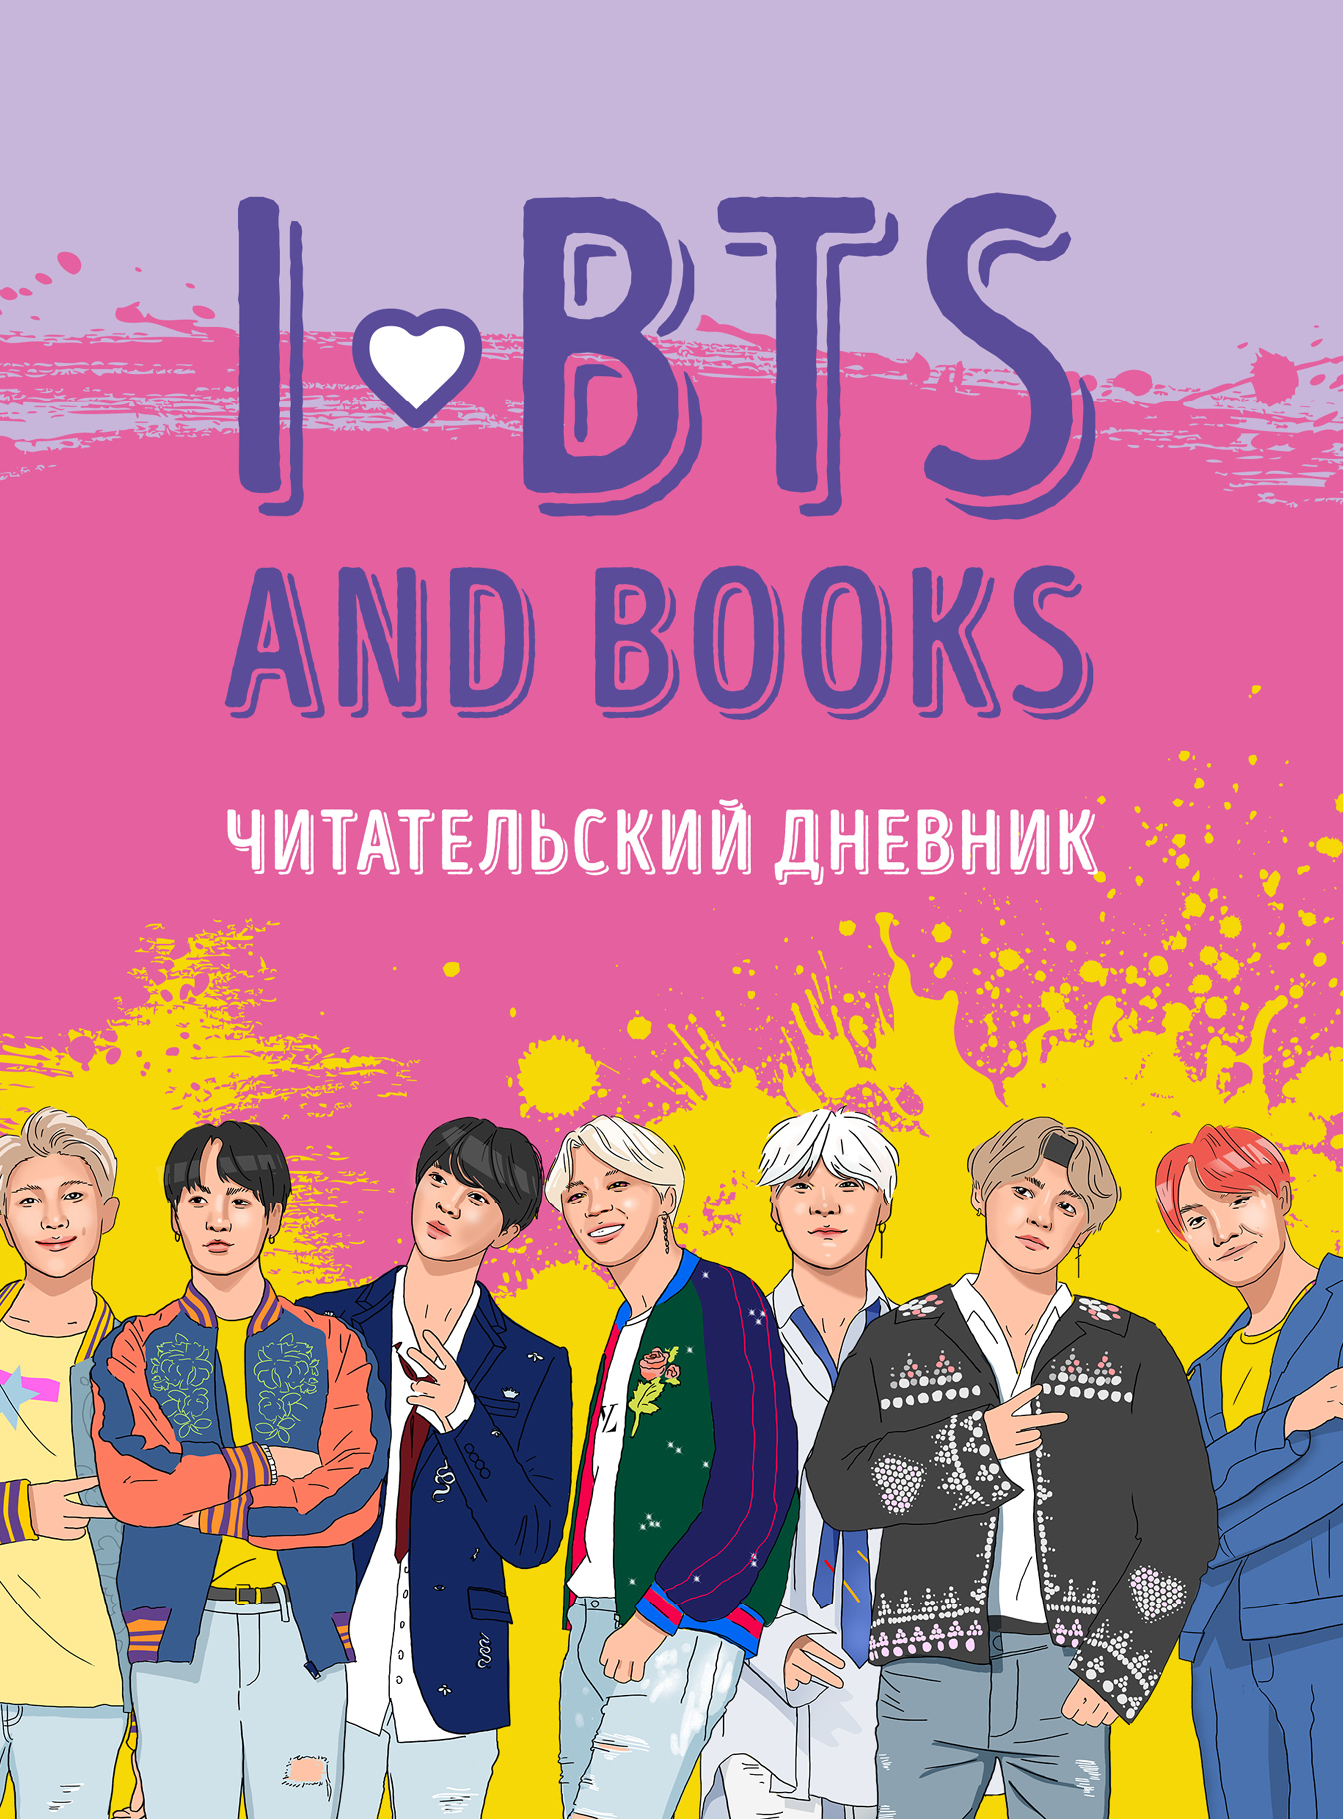    . I love BTS and books 